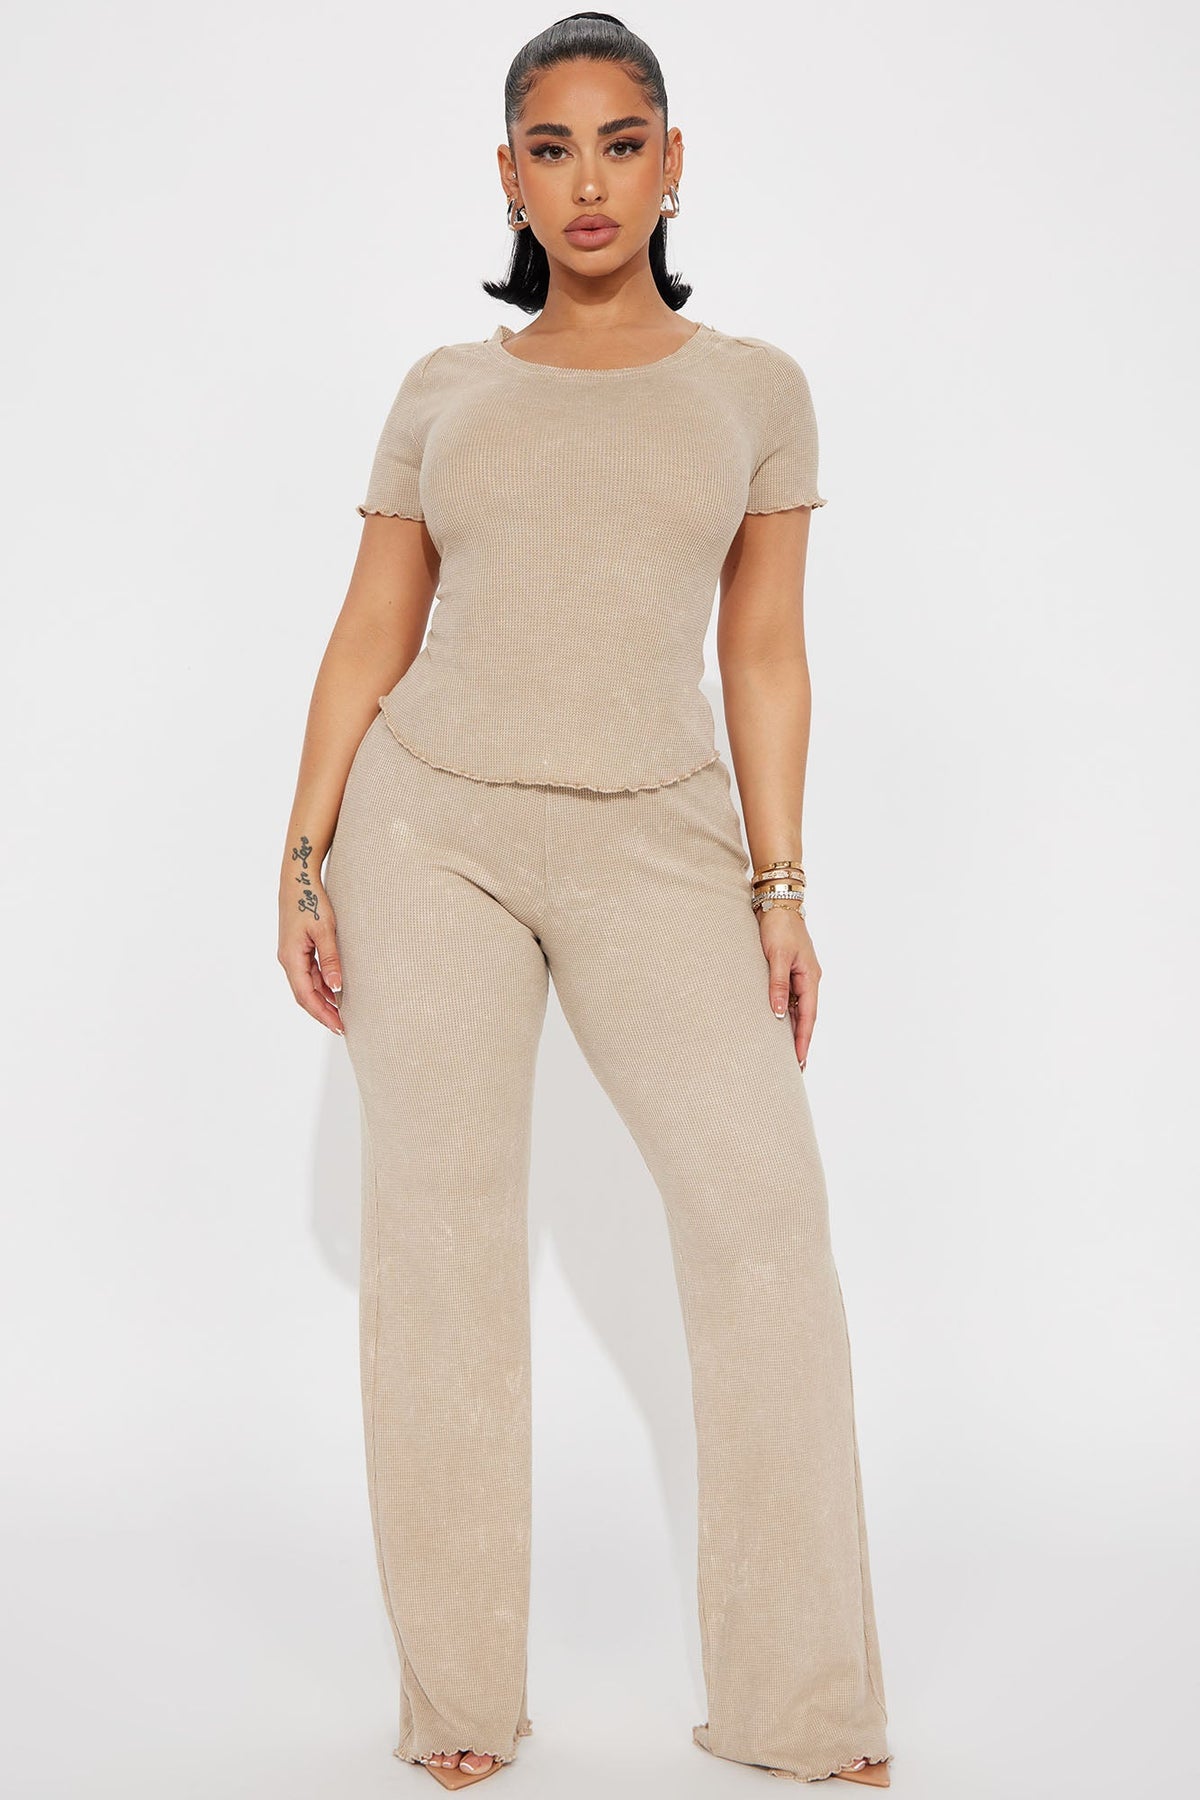 Out Of Sight Pant Set - Taupe